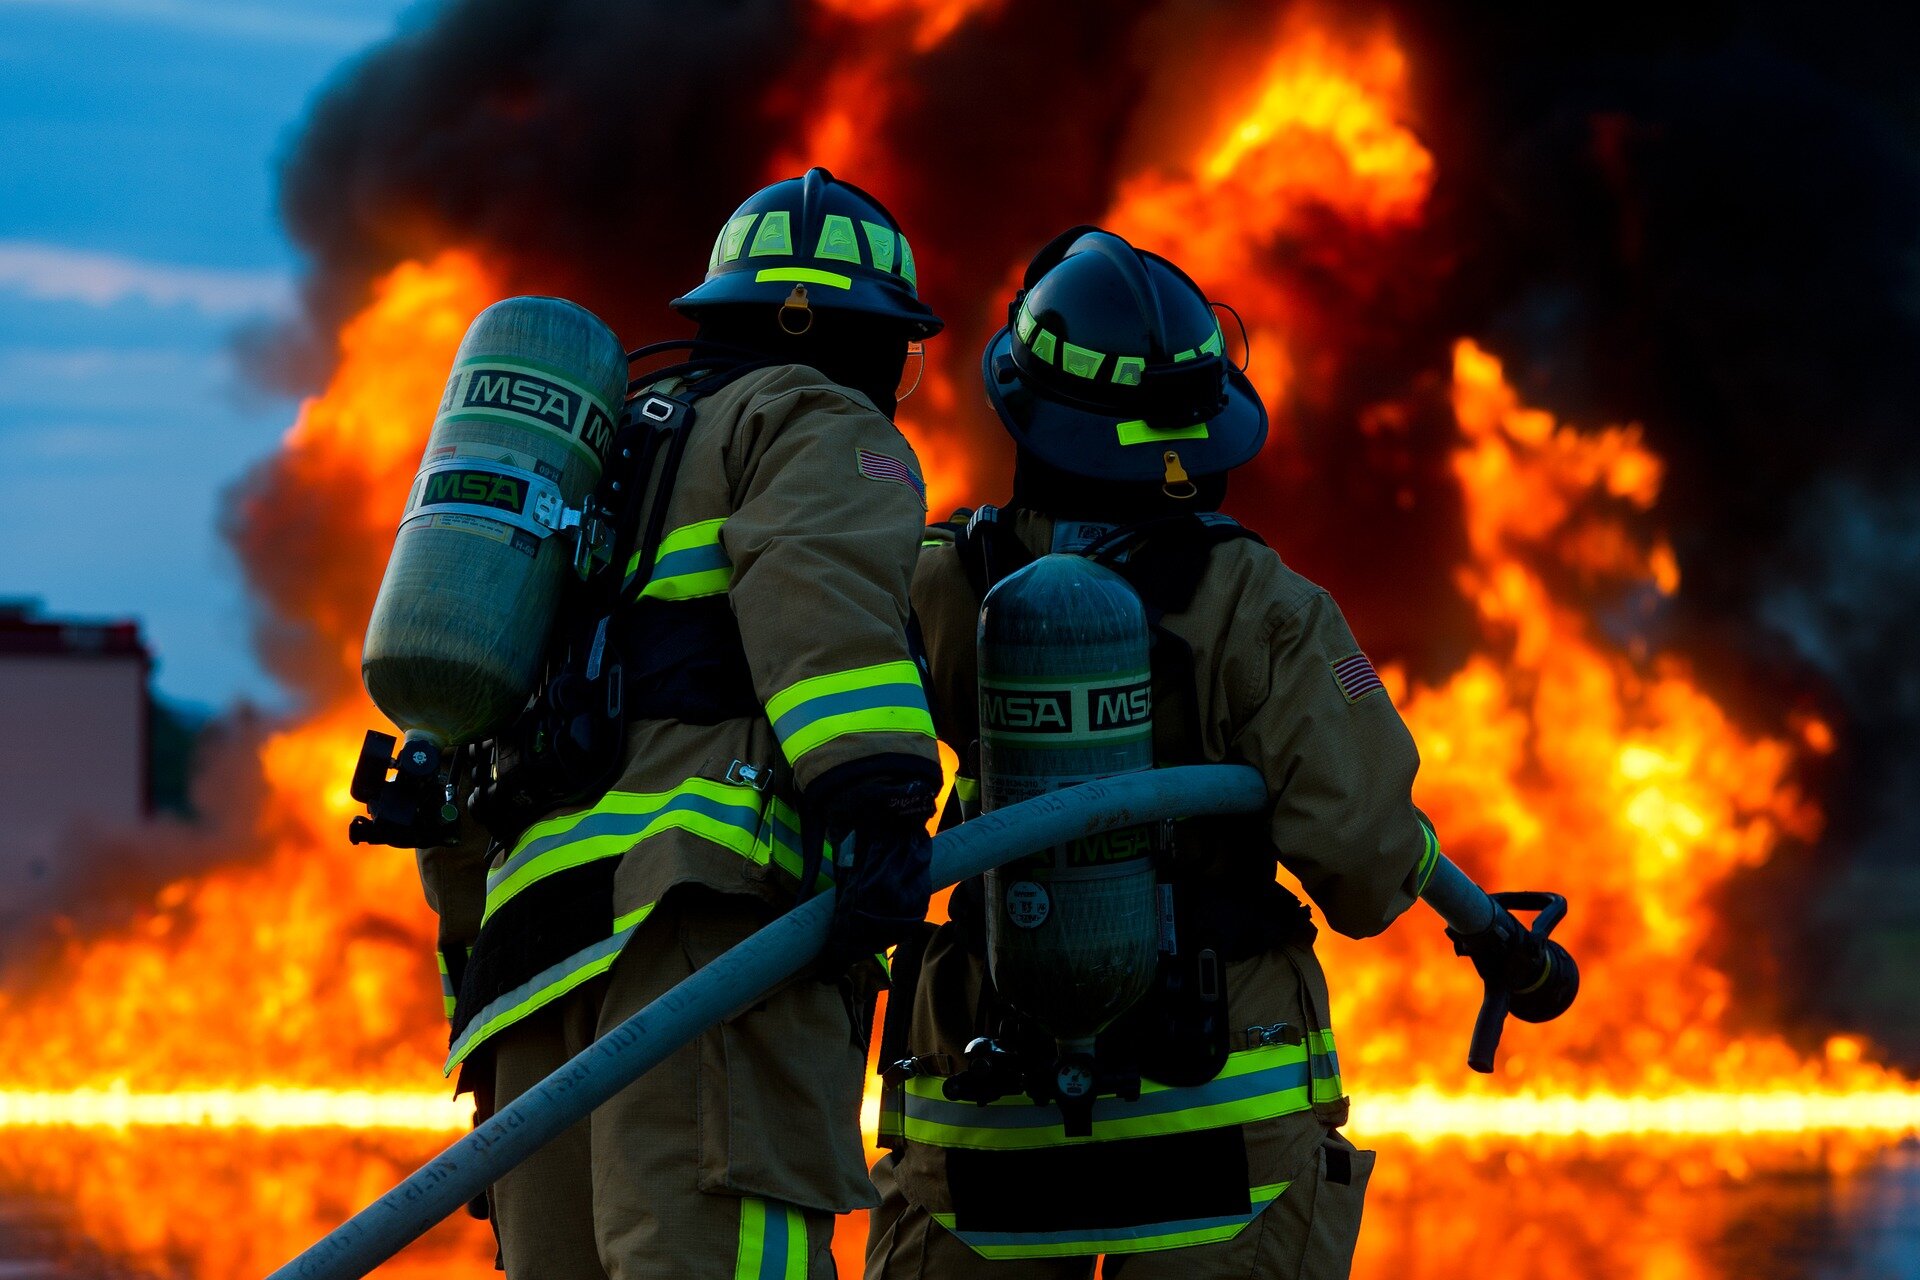 Sensor can detect when firefighters' protective clothing is no longer safe